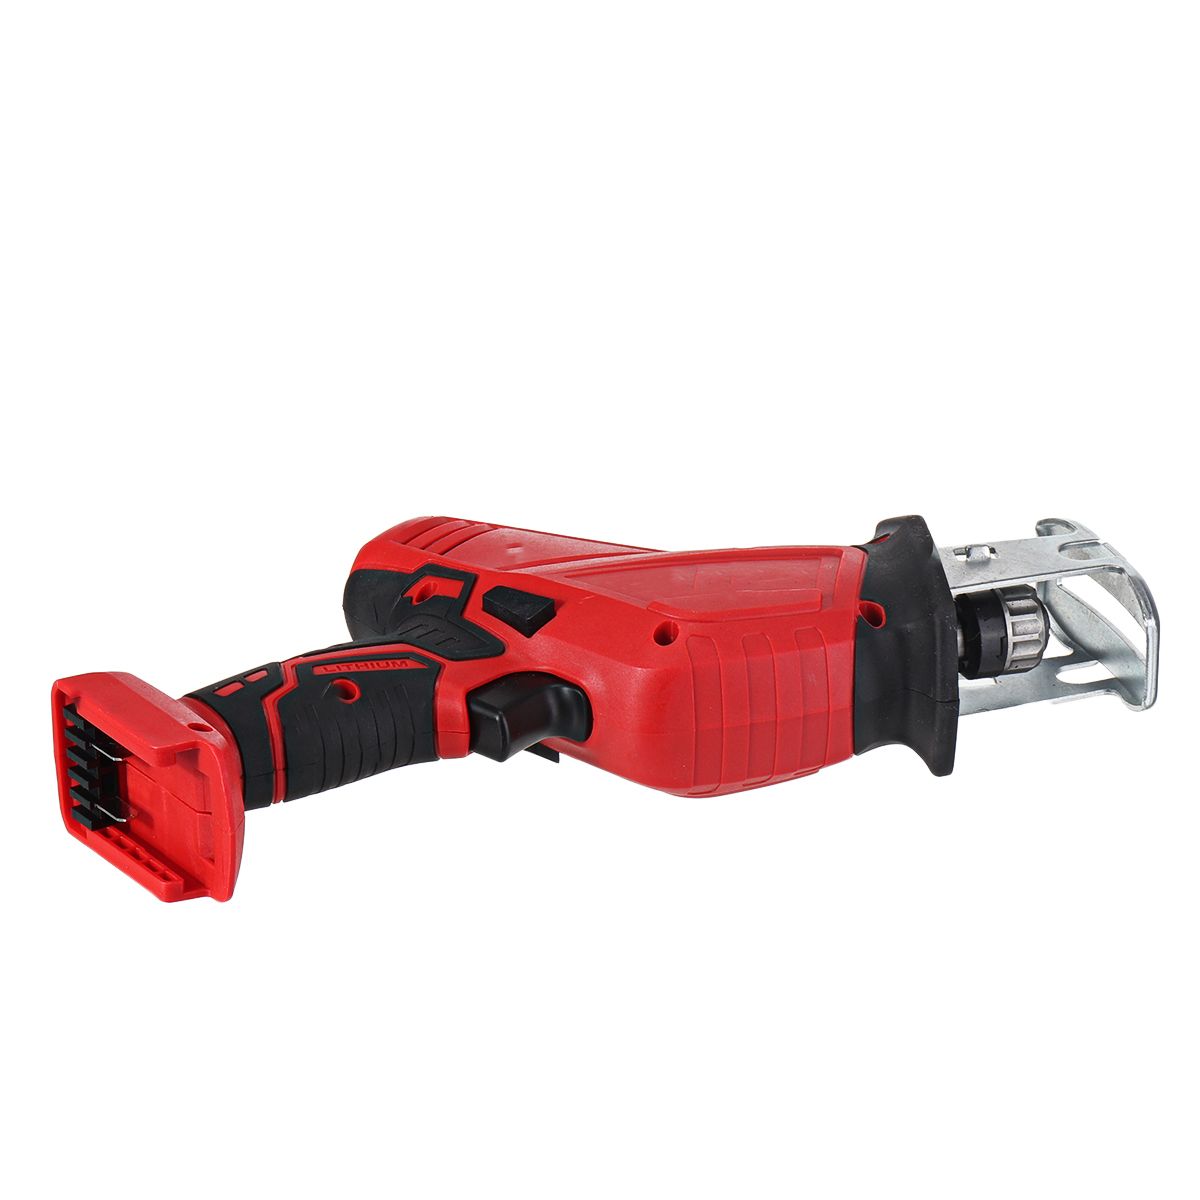 220V-Electric-Cordless-Saber-Saw-Reciprocating-Saw-Body-Only-Cutting-Woodworking-1724792